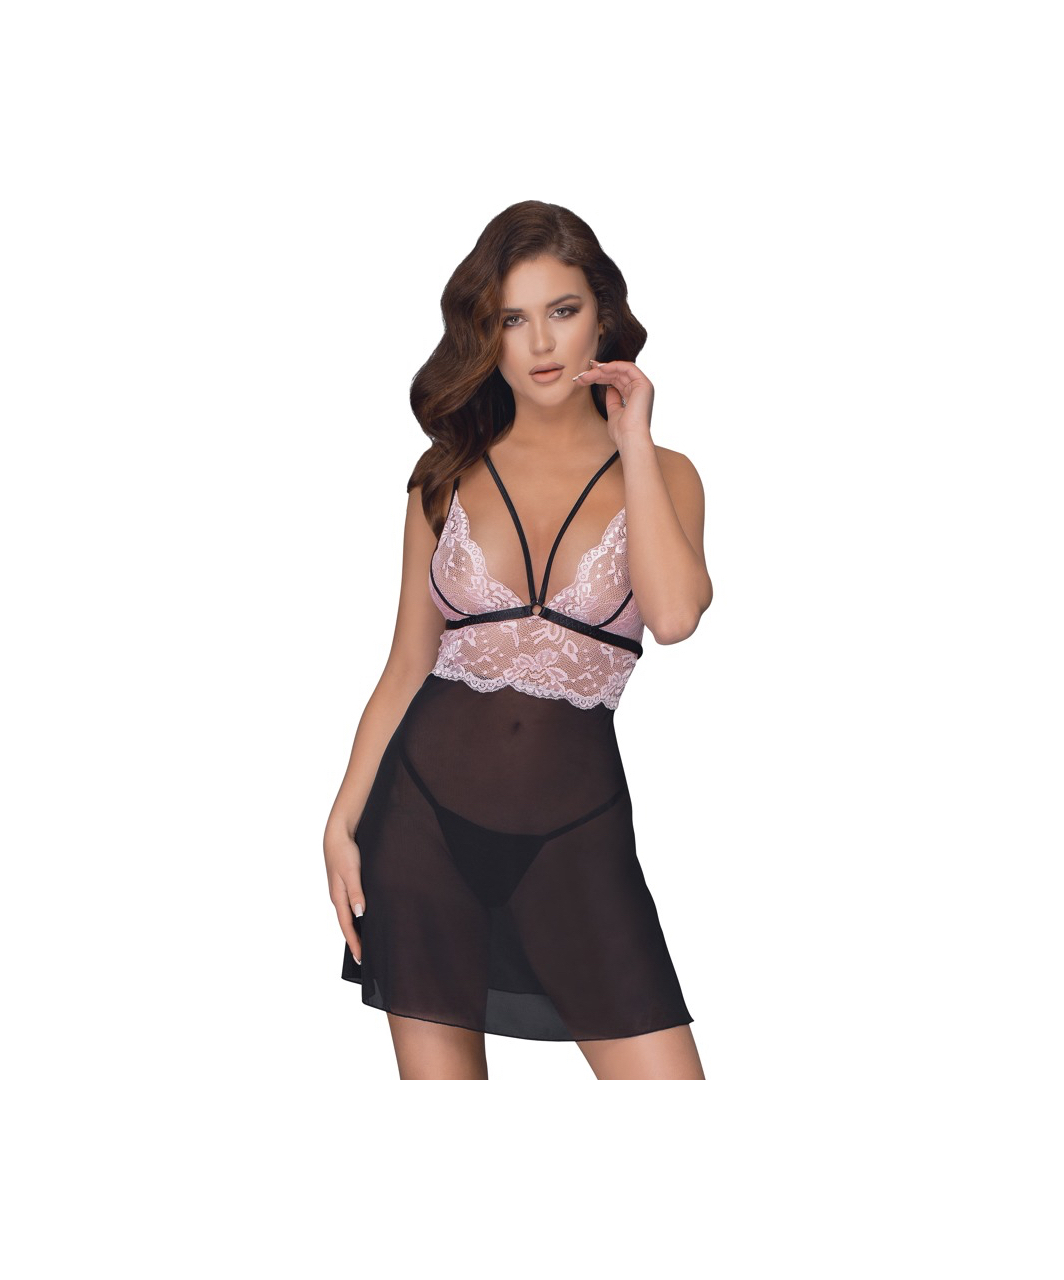 Cottelli Lingerie black sheer chemise with pink lace